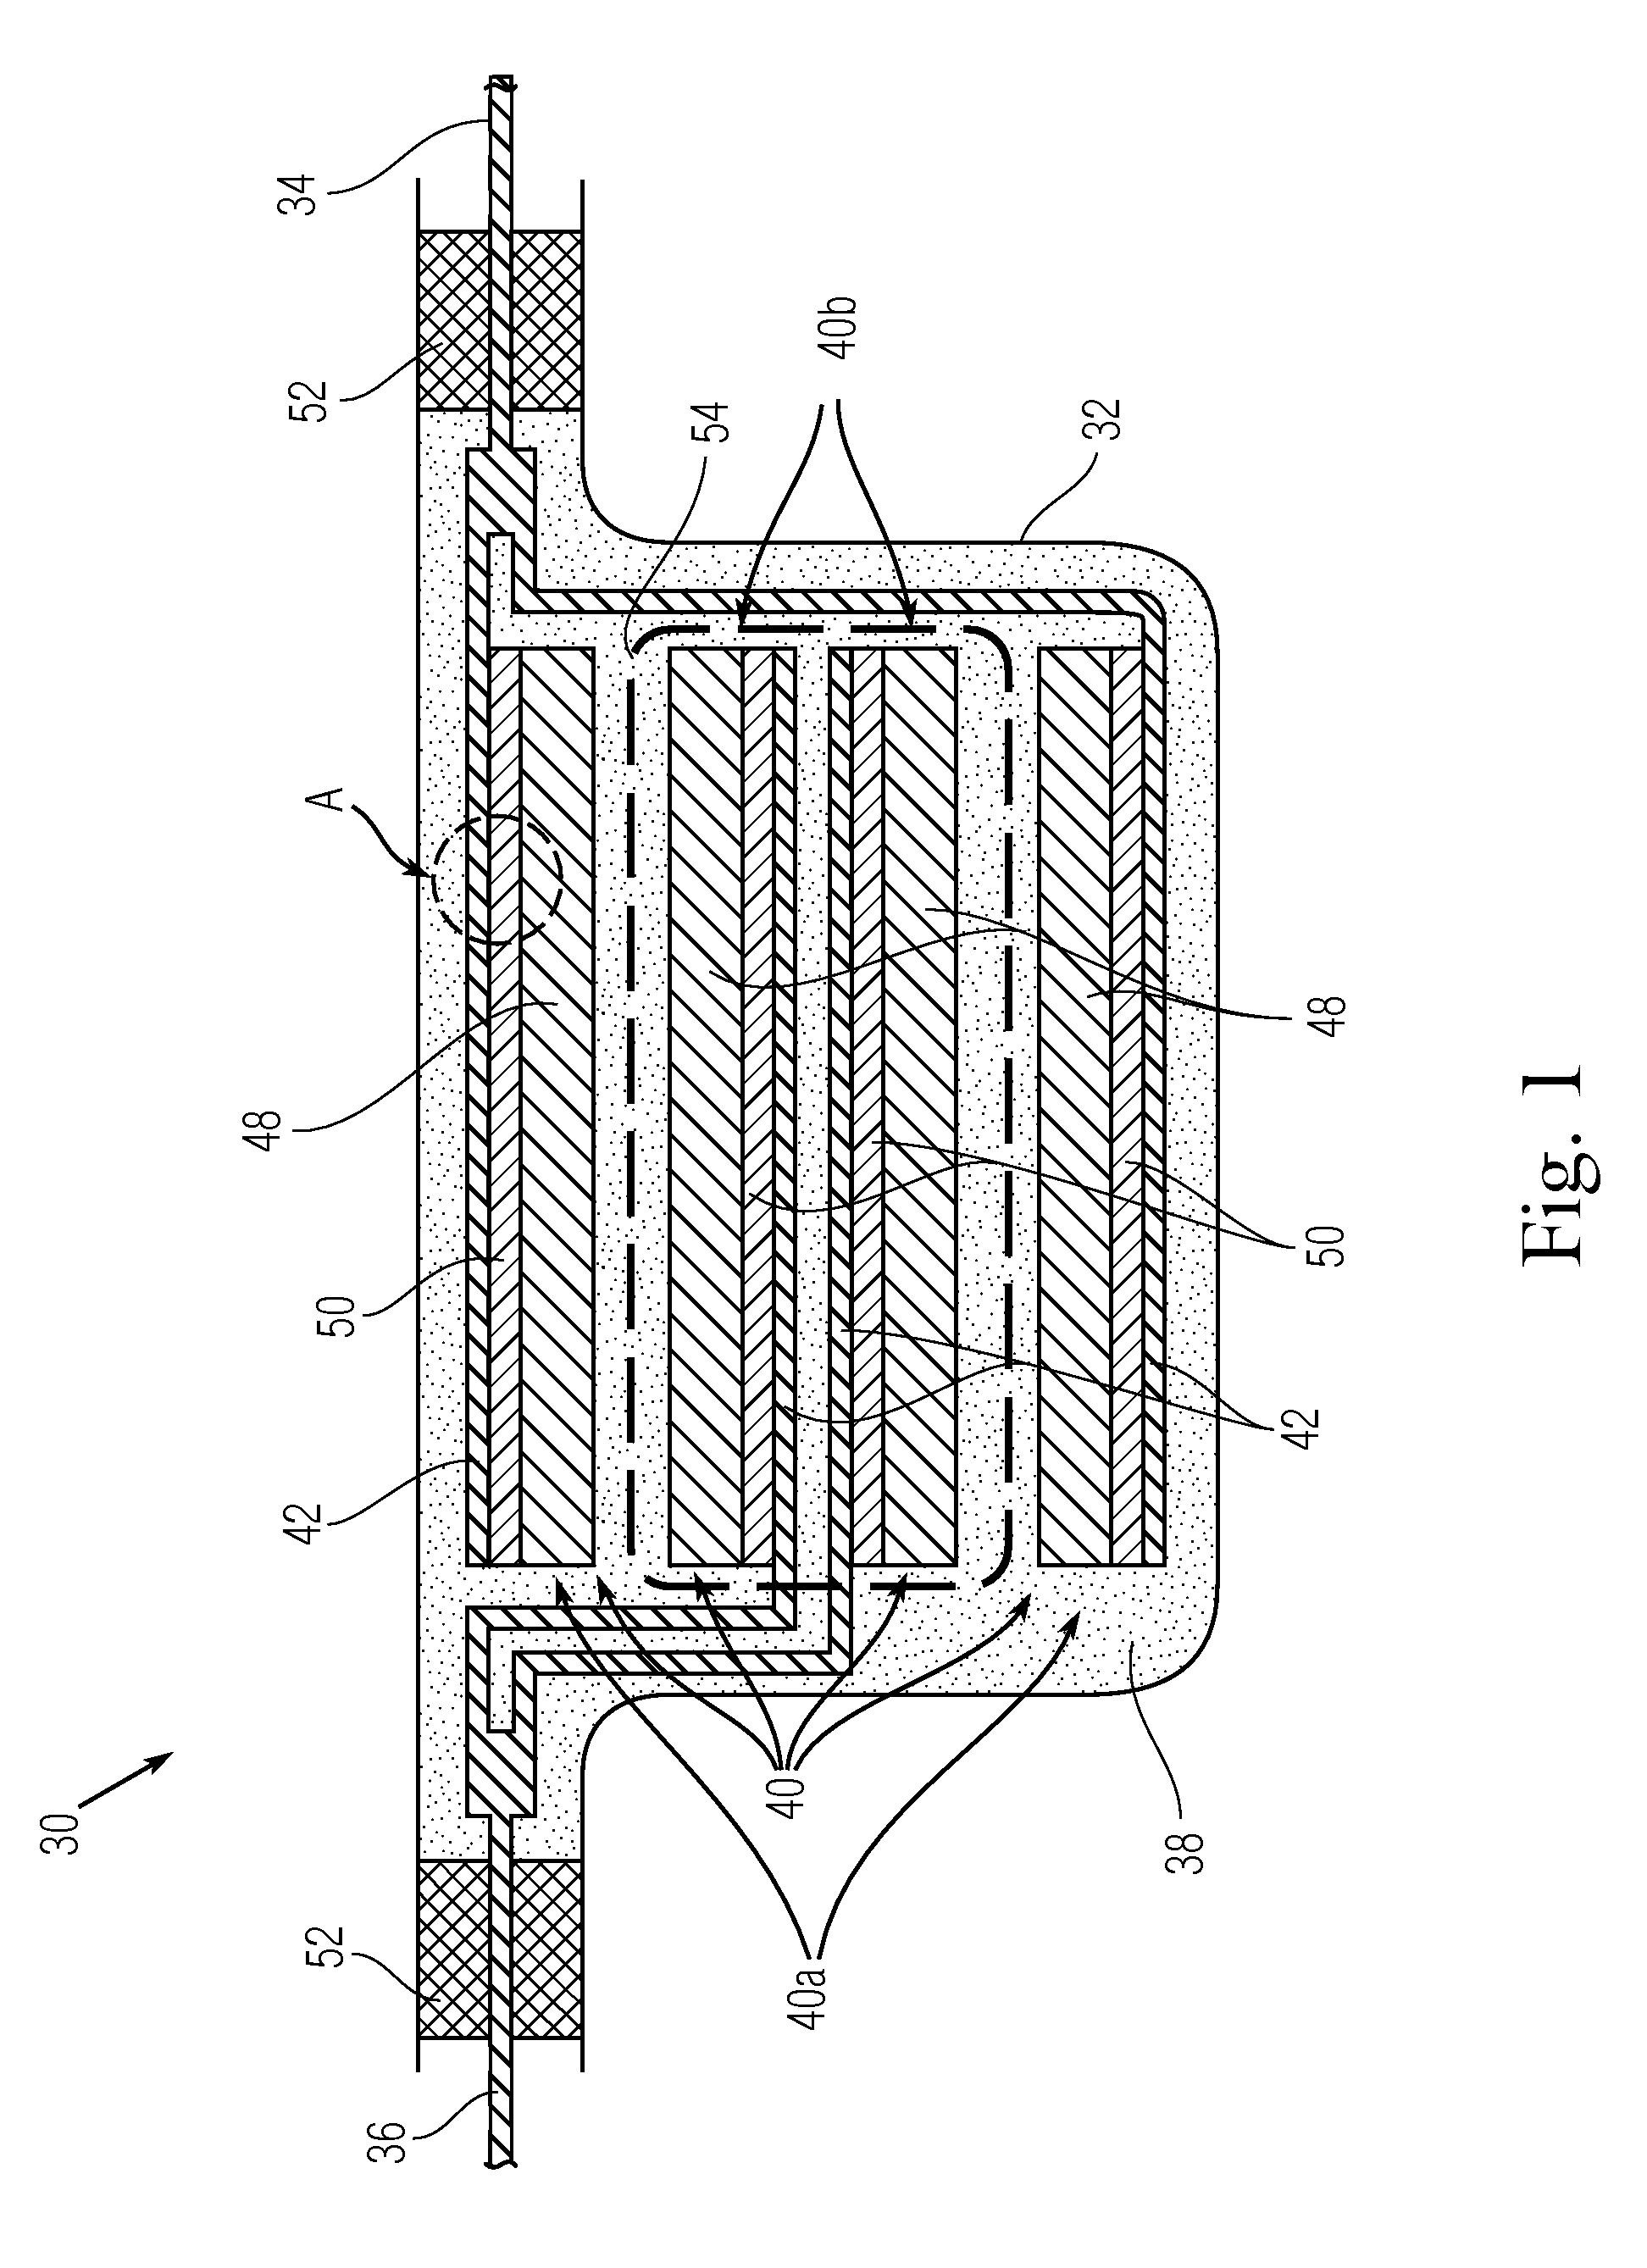 Electrochemical double layer capacitor